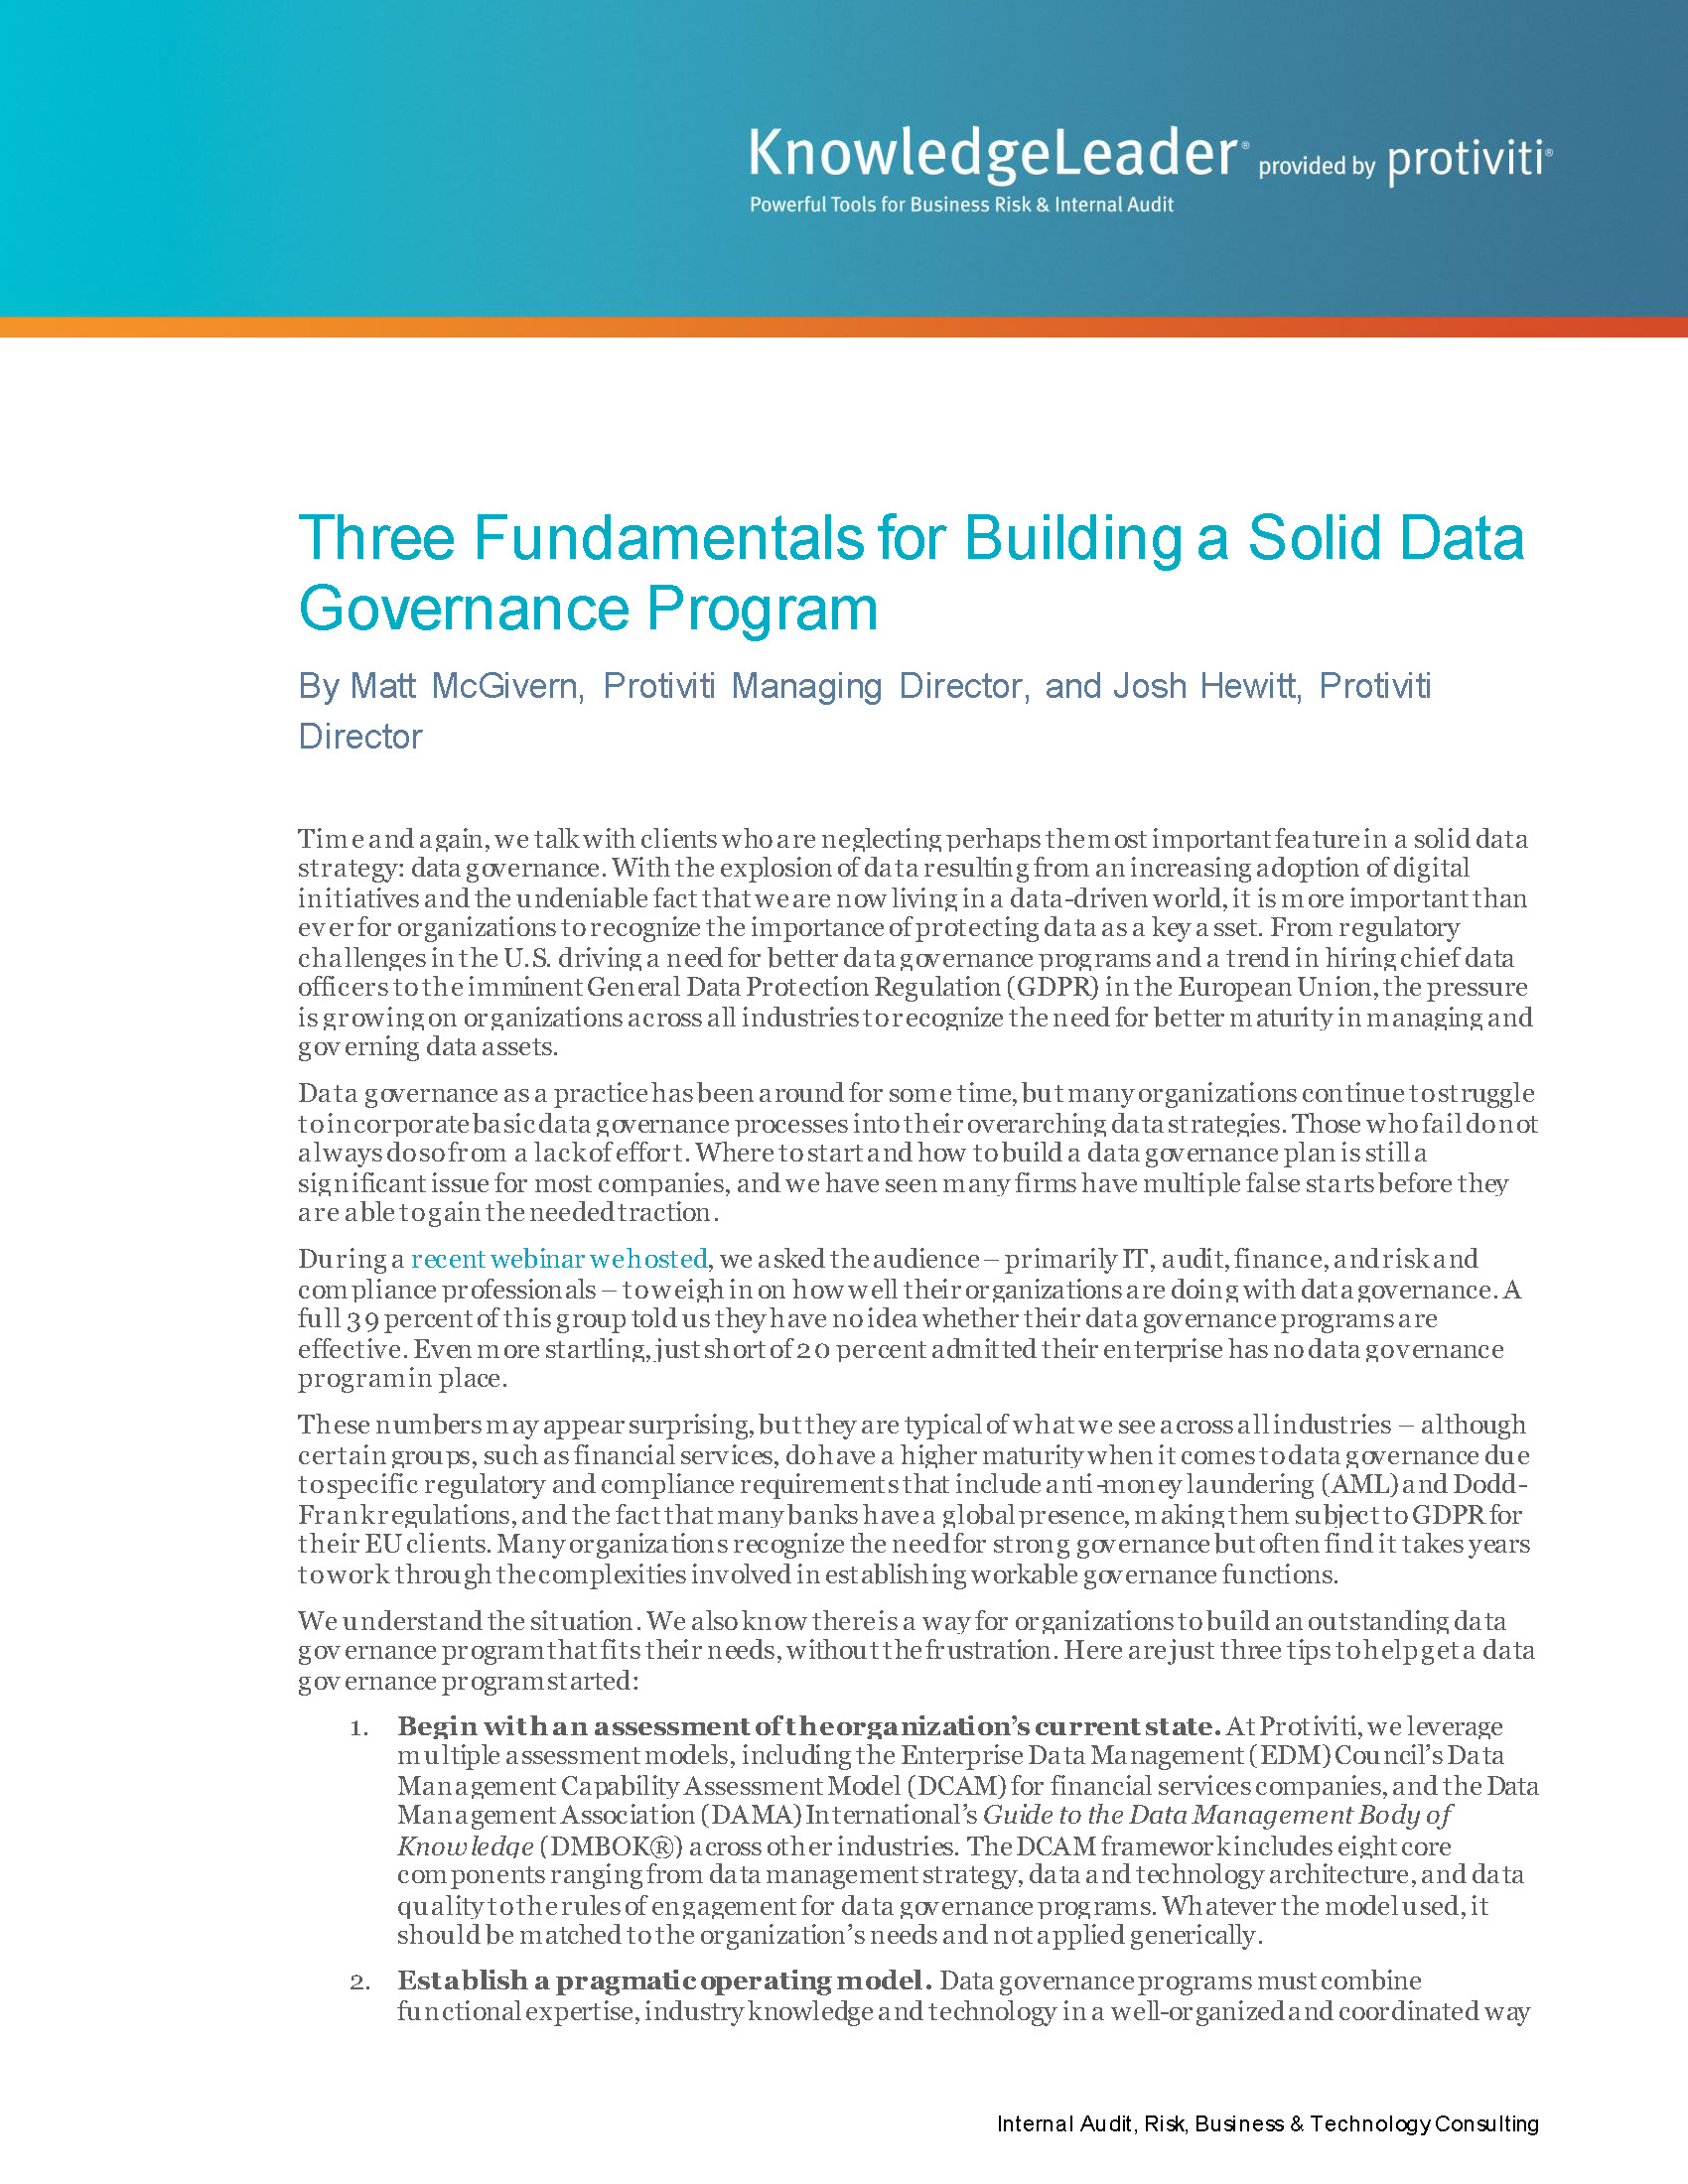 Screenshot of the first page of Three Fundamentals for Building a Solid Data Governance Program